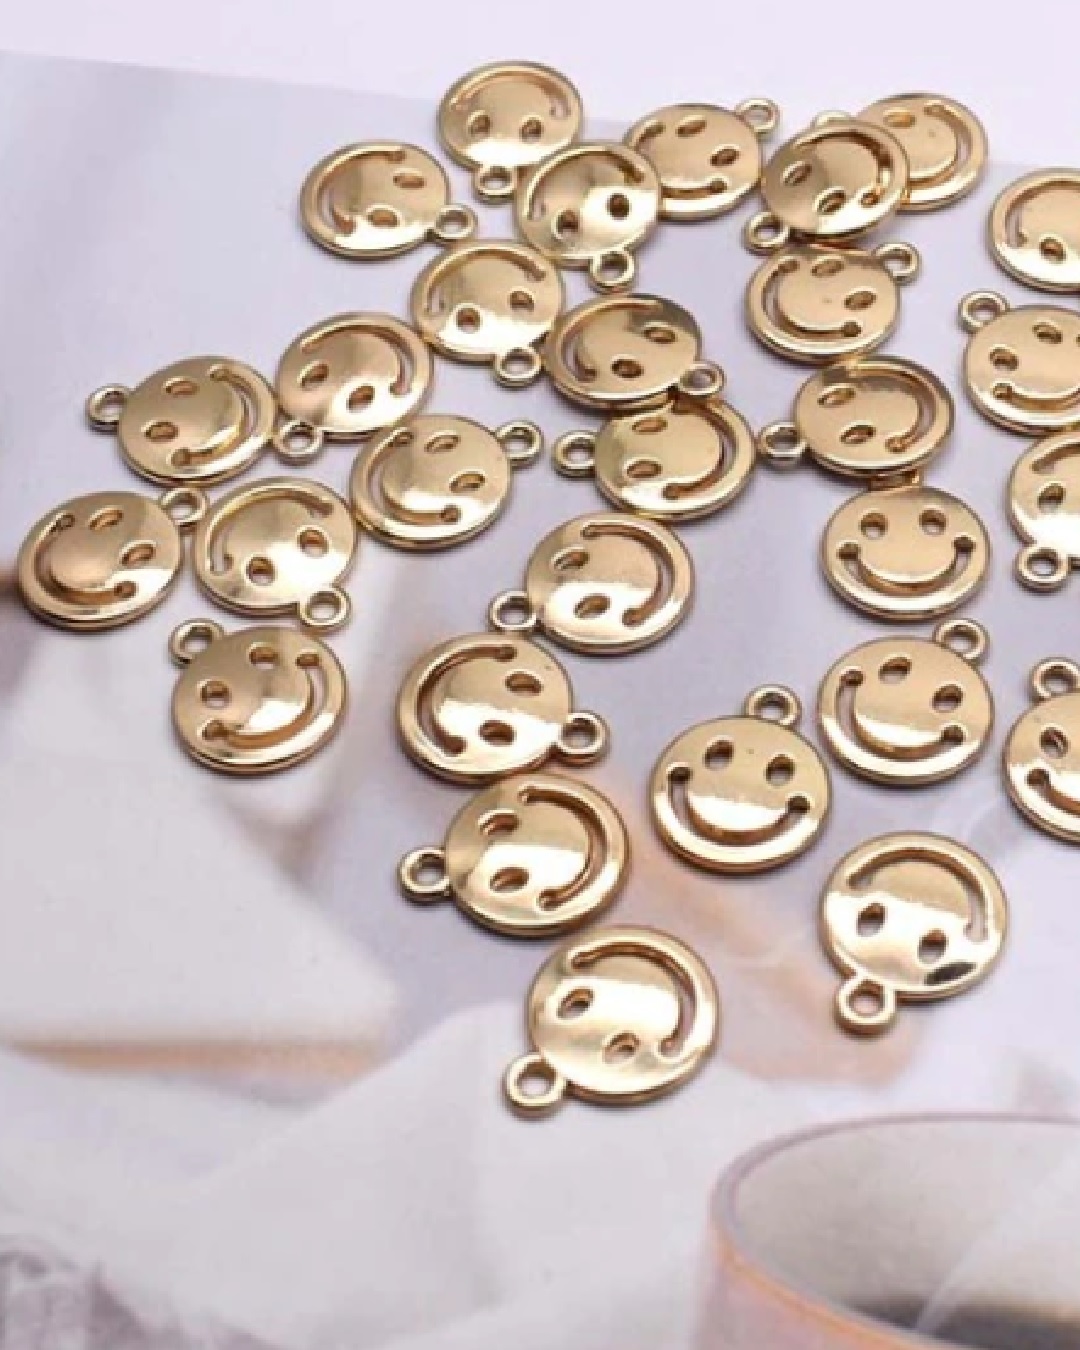 Smiley face charms